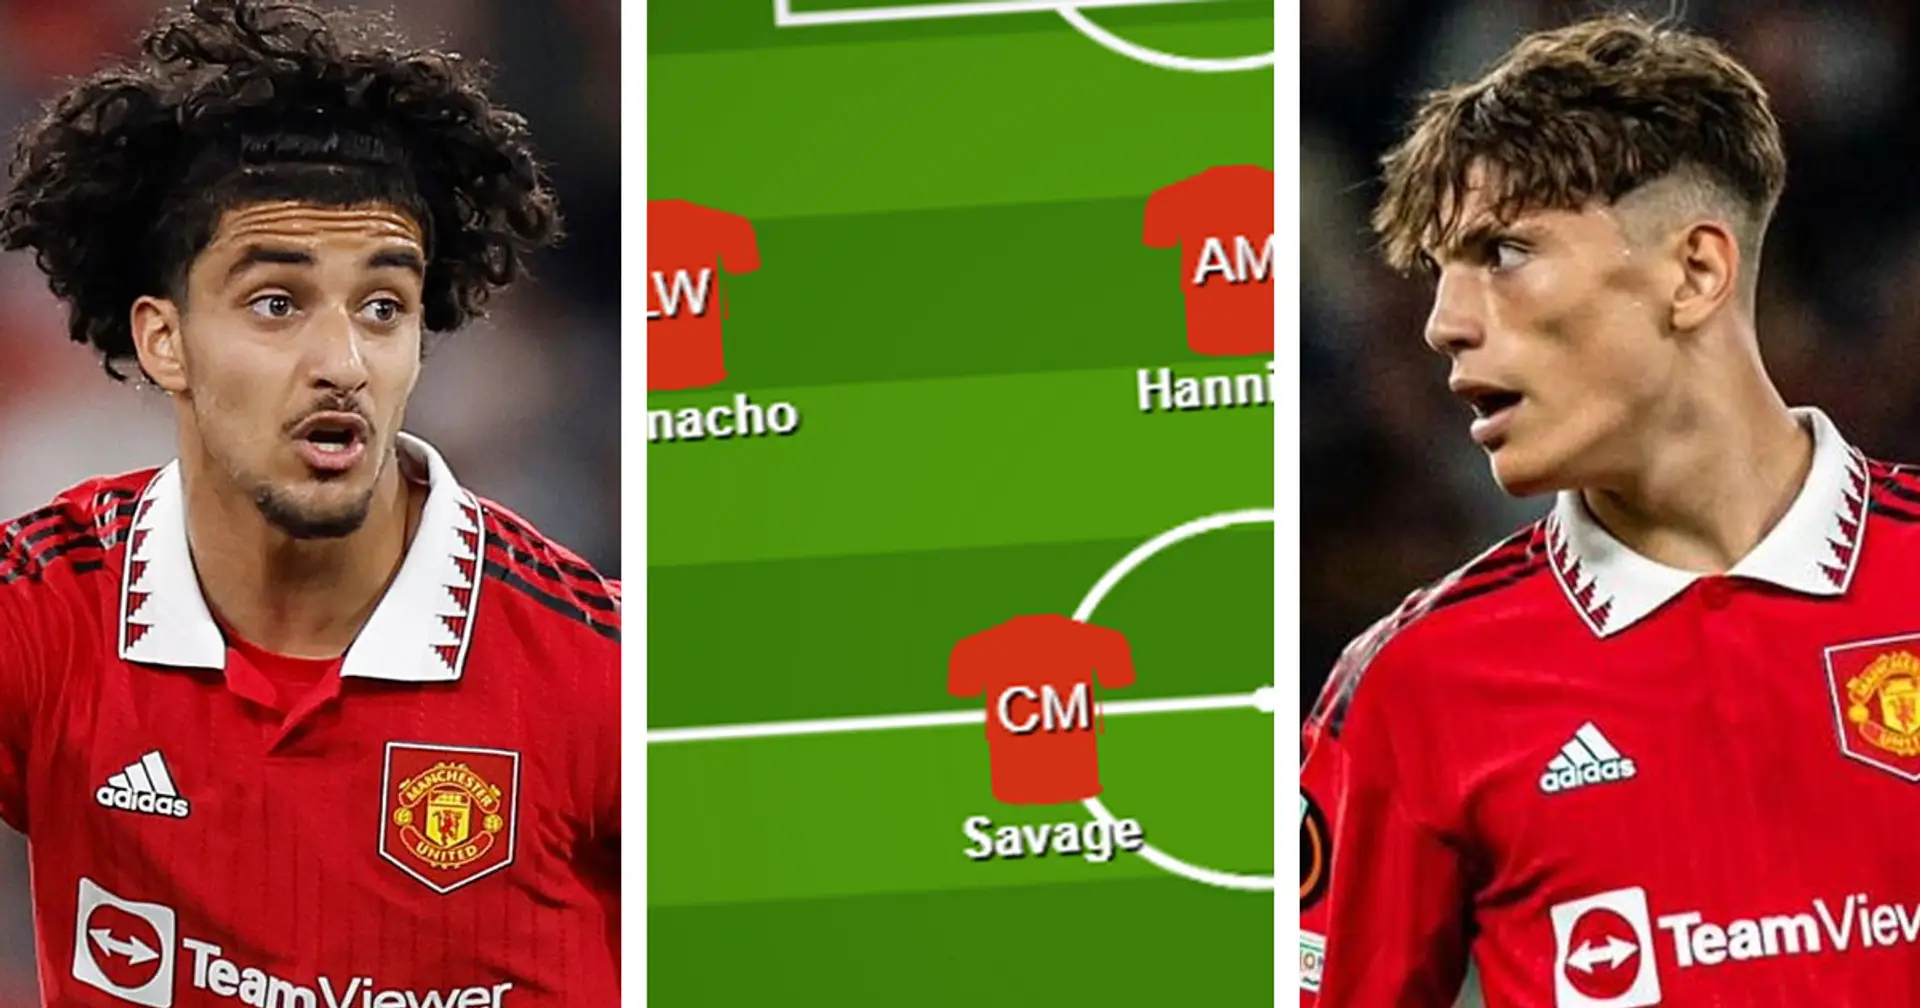 5 Man United kids with potential to become stars within next 5 years - shown in pic